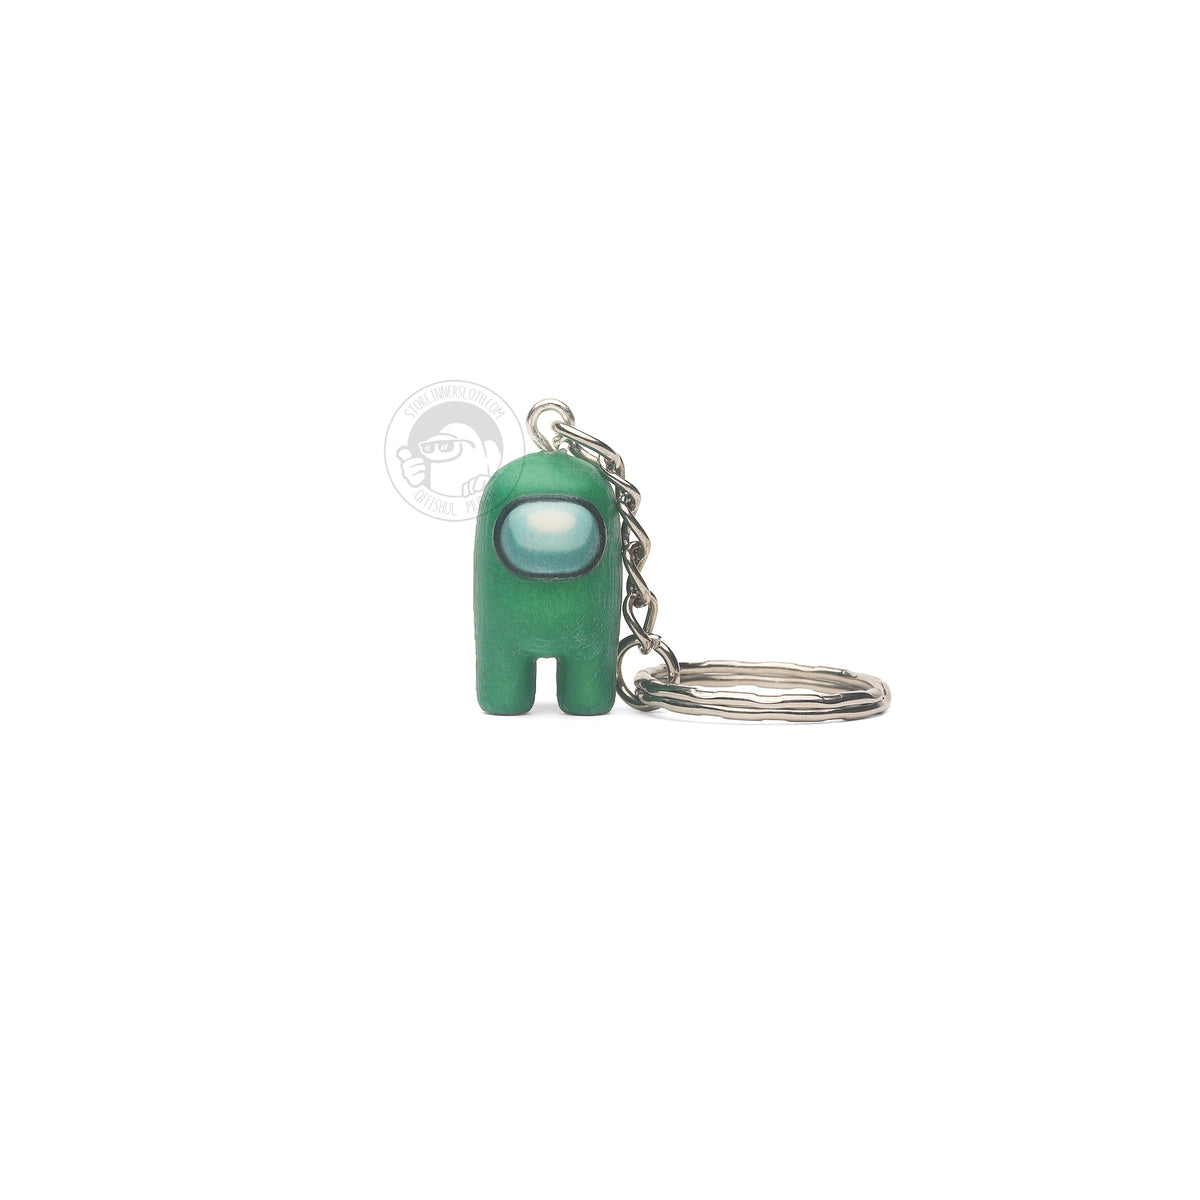 A product photo of the Among Us: Crewmate Keychain by Objex Unlimited Inc. in green. It is standing, and a silver keychain rests beside it.